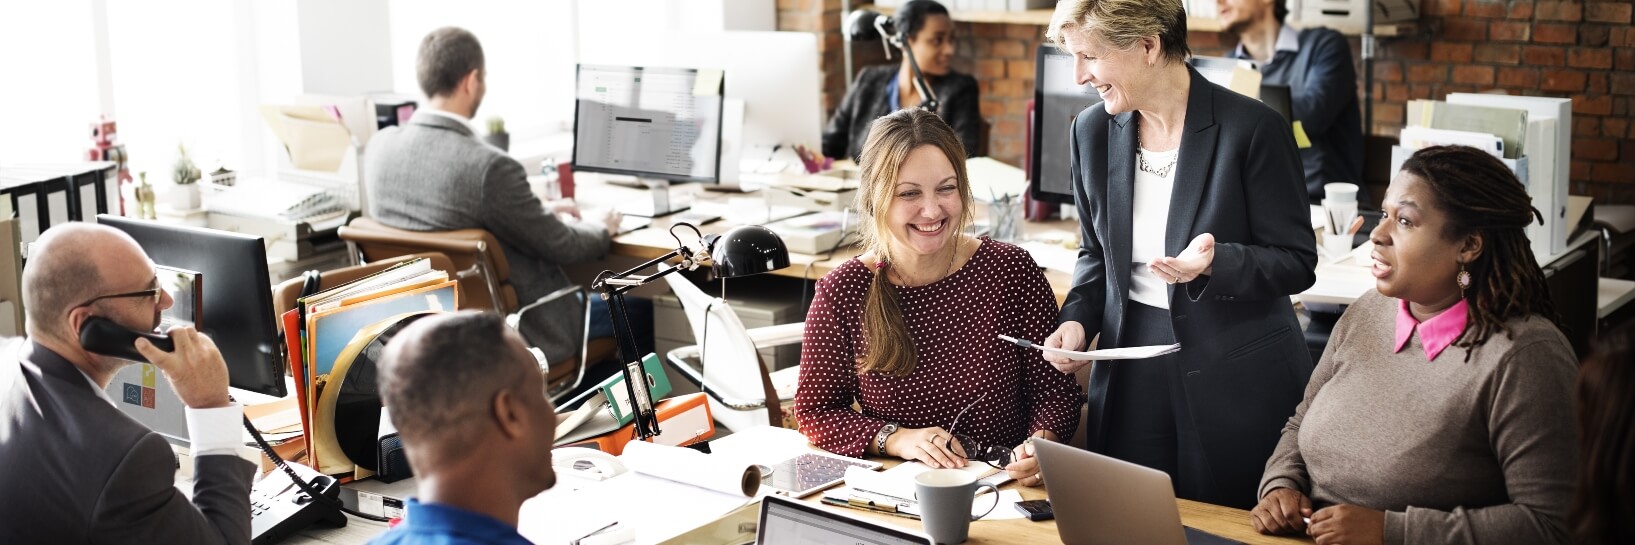 employees working in small office smiling